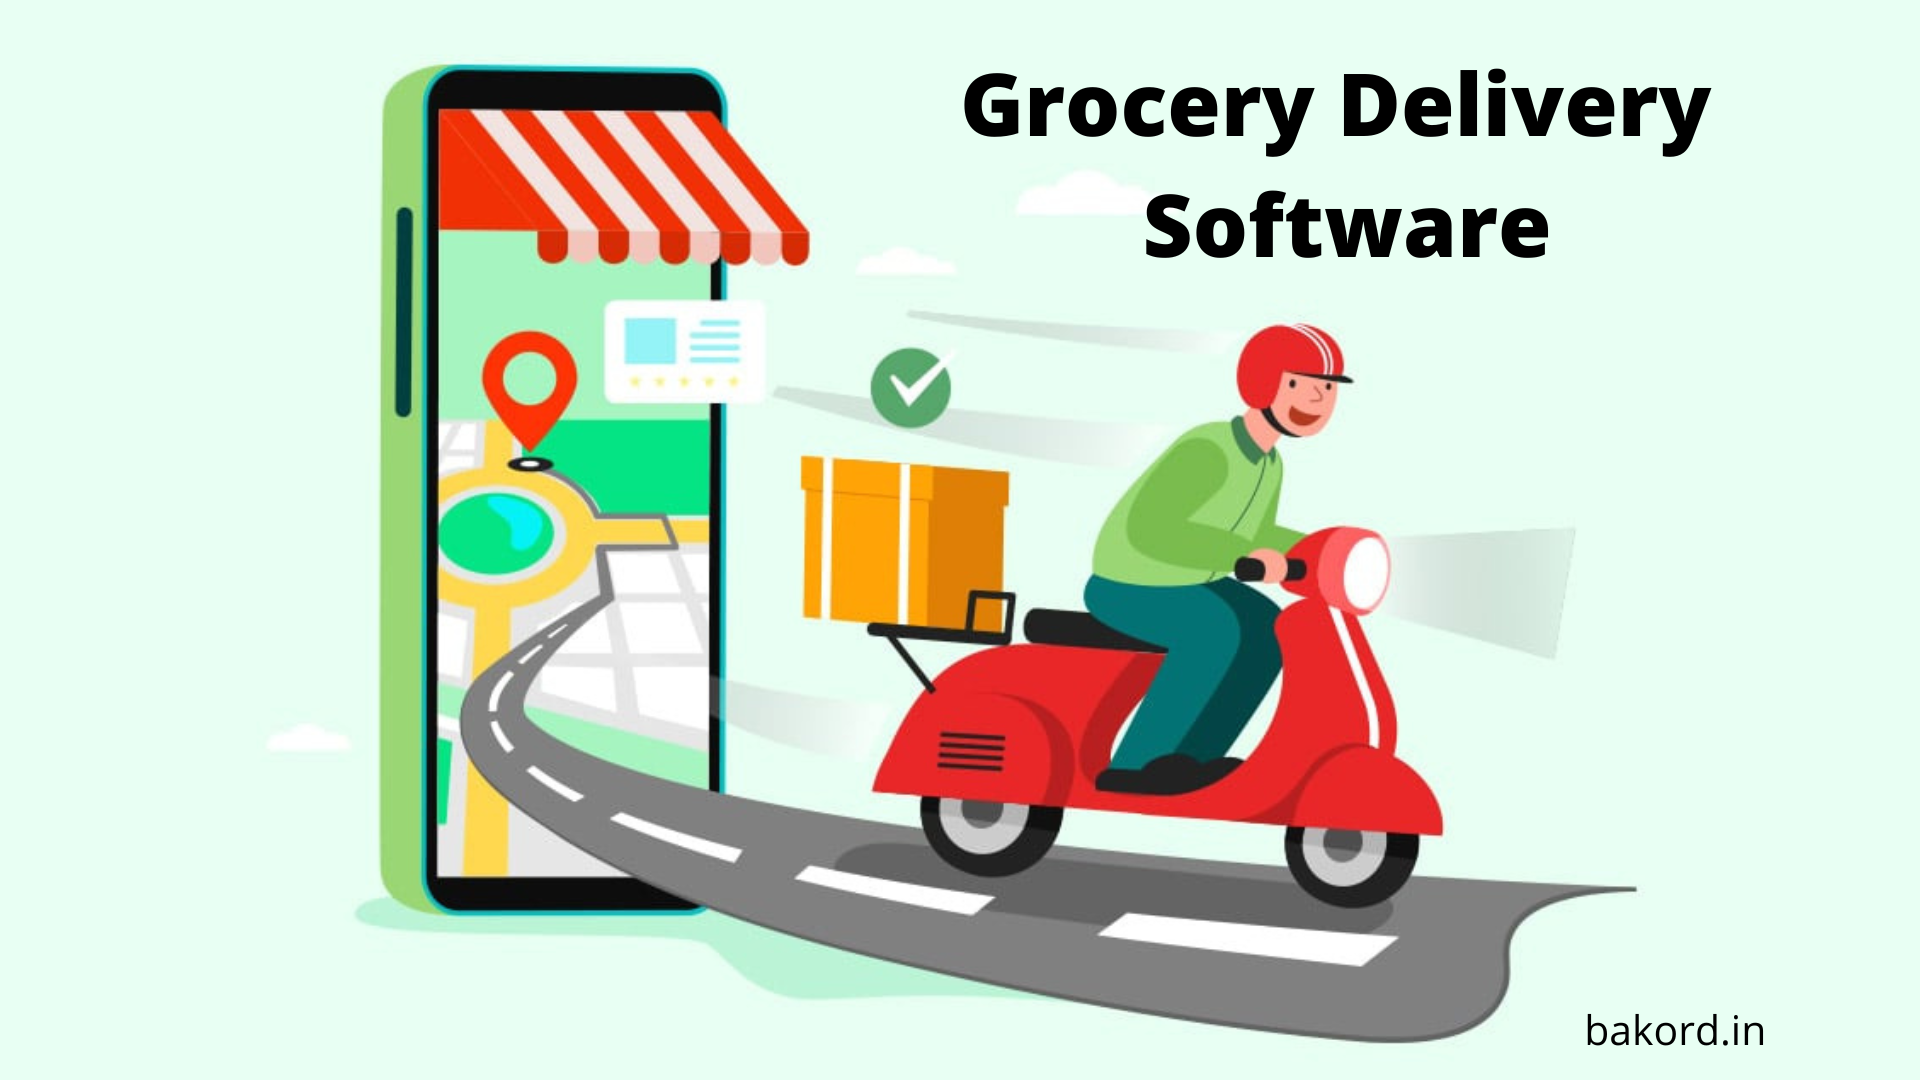 What Are The Facets To Considering A Development Of Grocery Delivery Software?